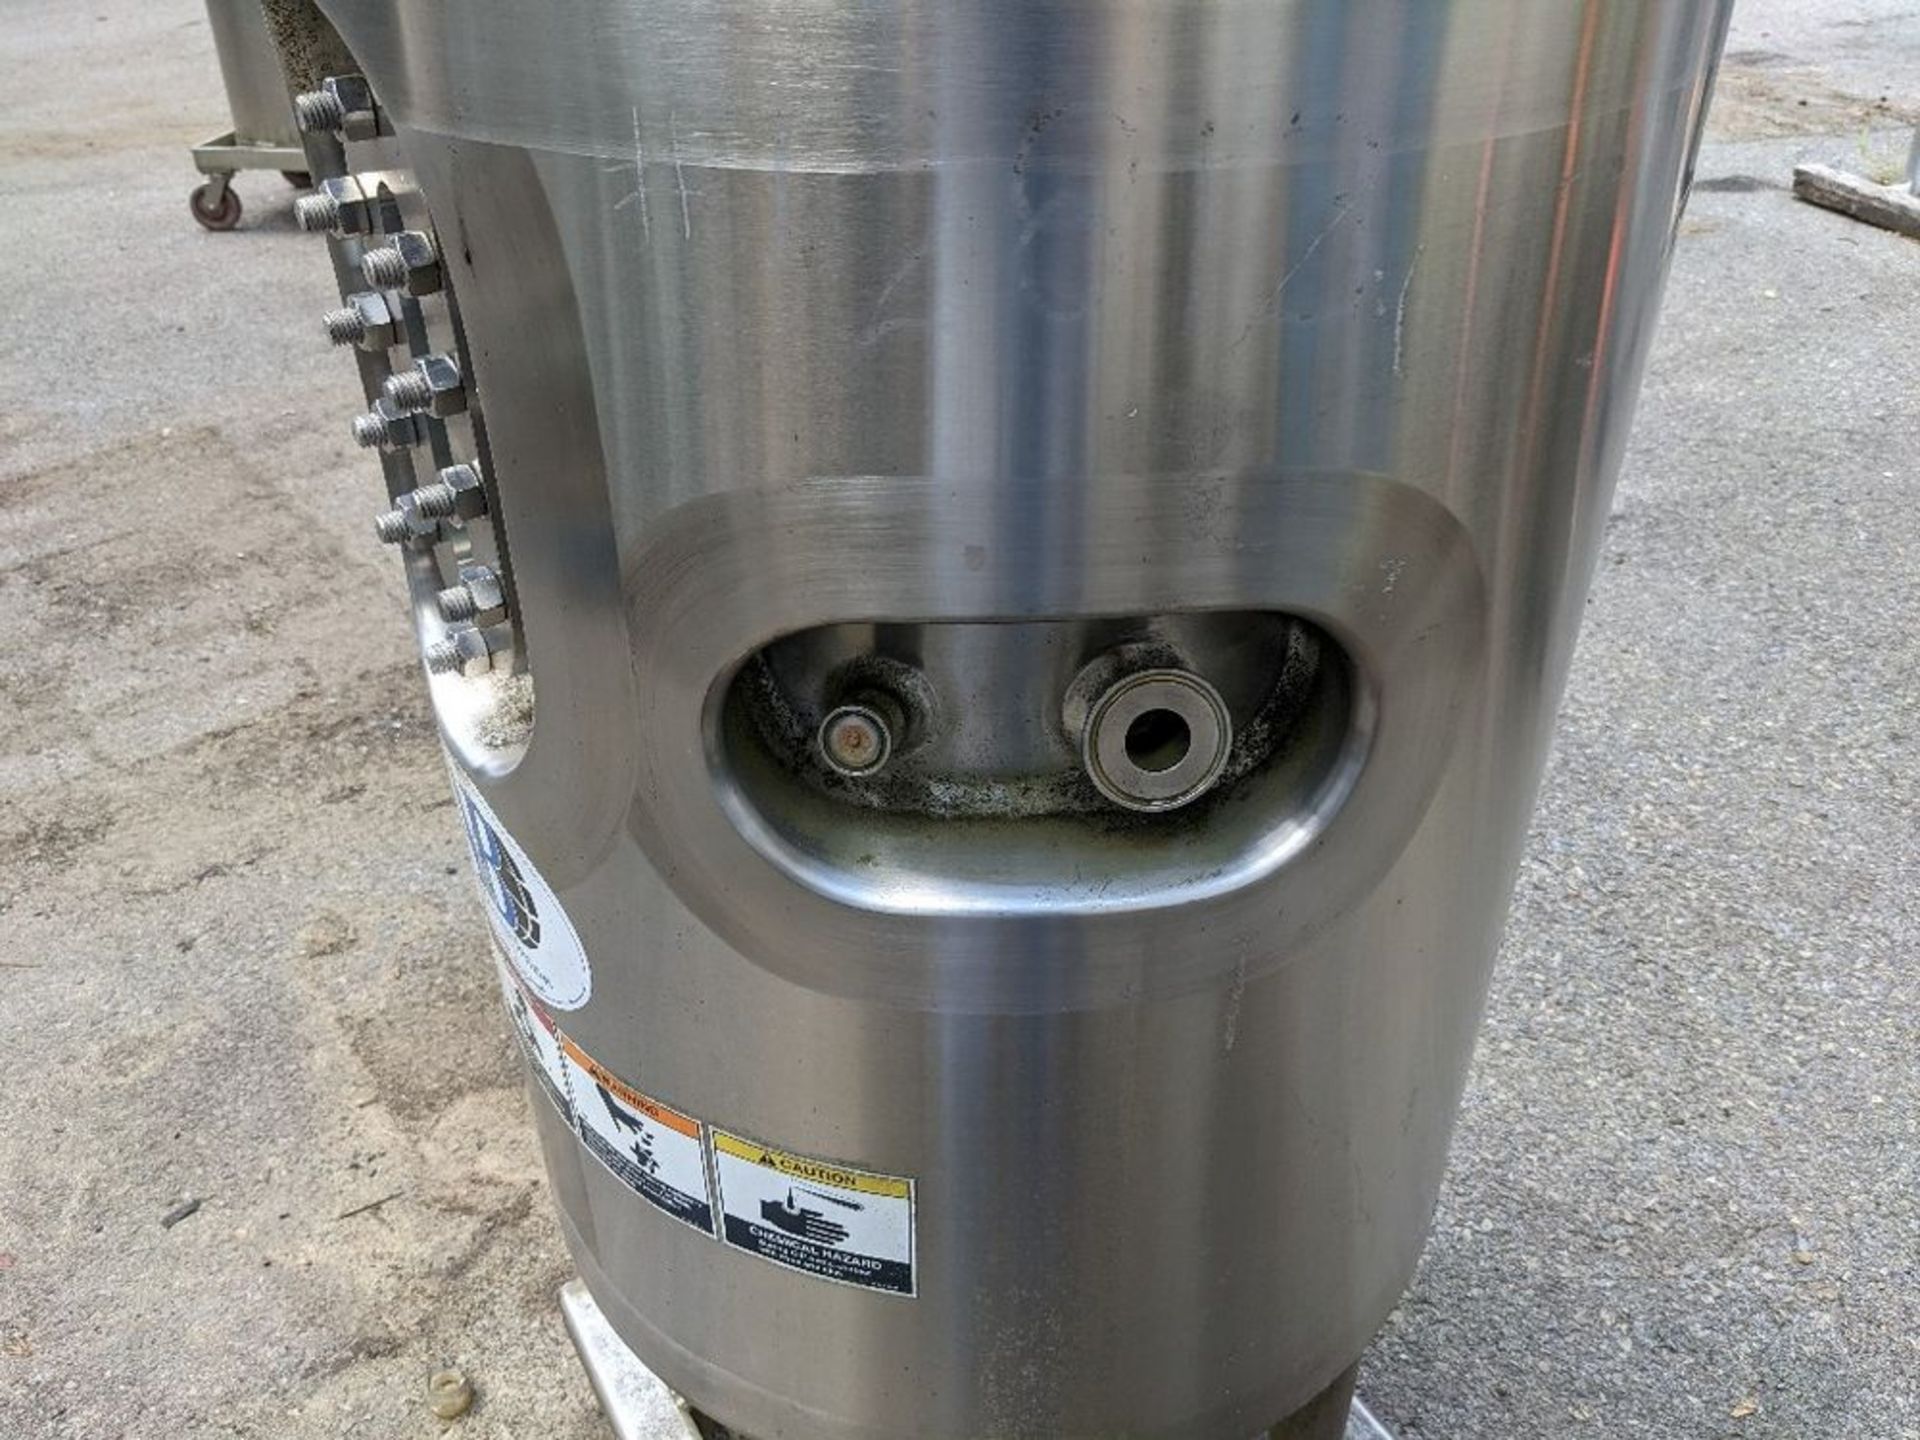 Qty (1) A+B Process Jacketed Vertical Stainless Steel Pressure Tank or Reactor 20 Gallon - - Image 3 of 7